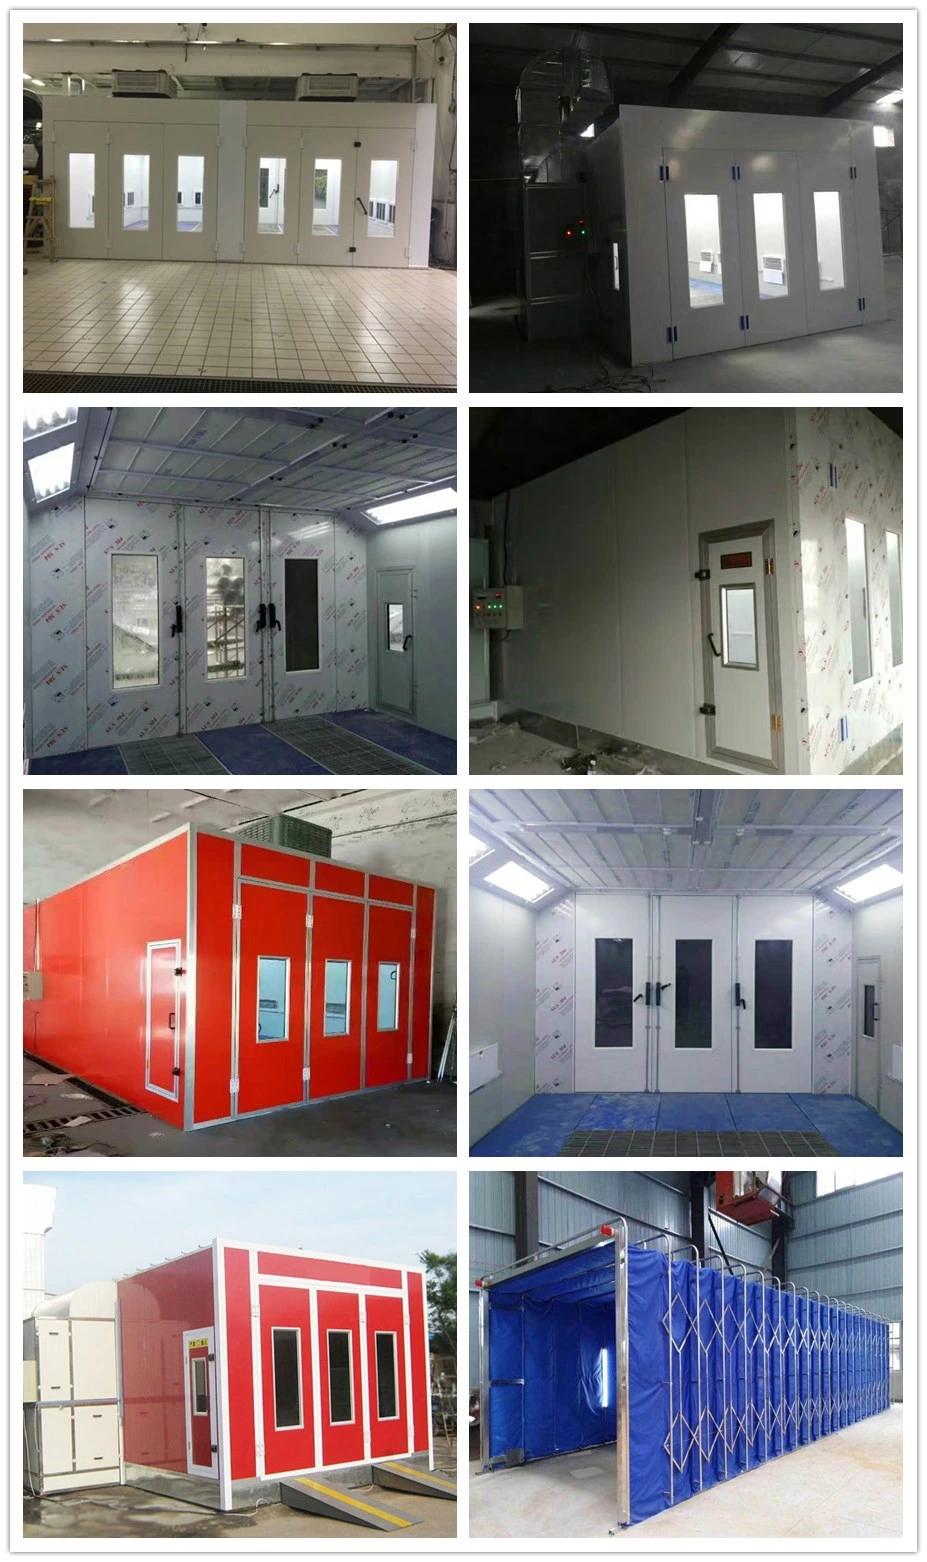 Fireproof and Waterproof Economical Auto Maintenance Equipment Spray Paint Booth